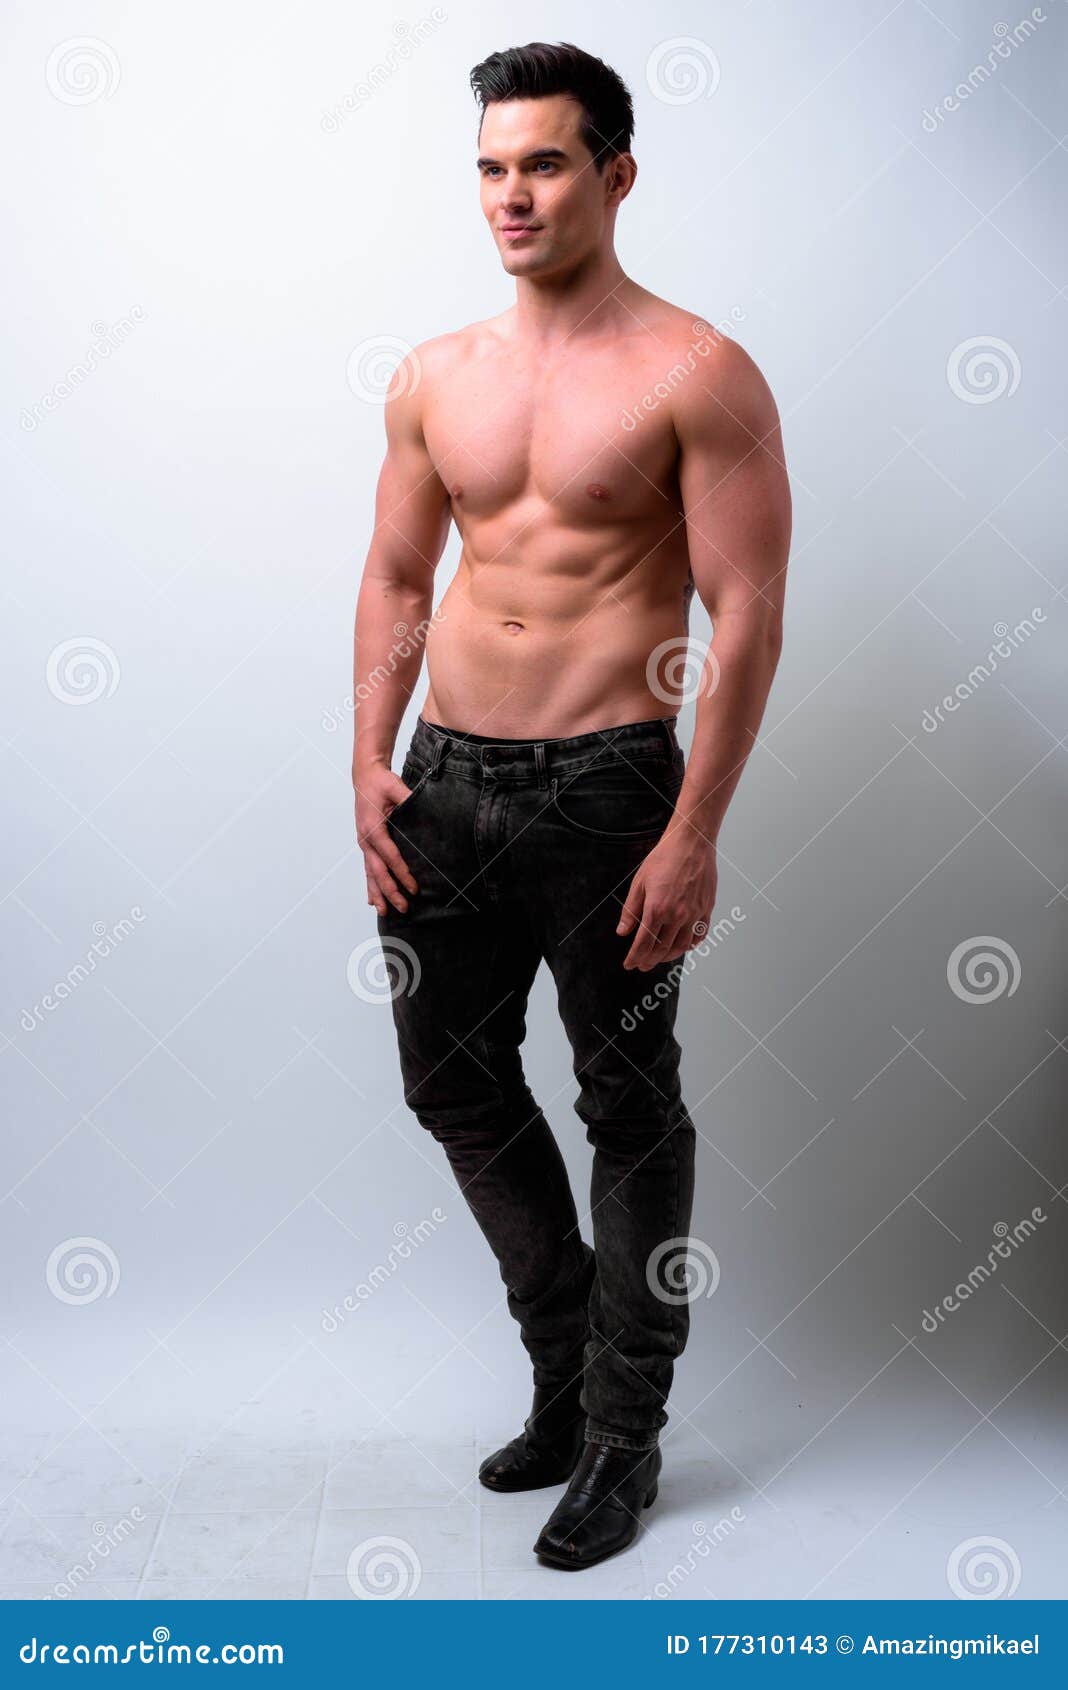 Handsome Muscular Men Exercise At The Gym Stock Photo 